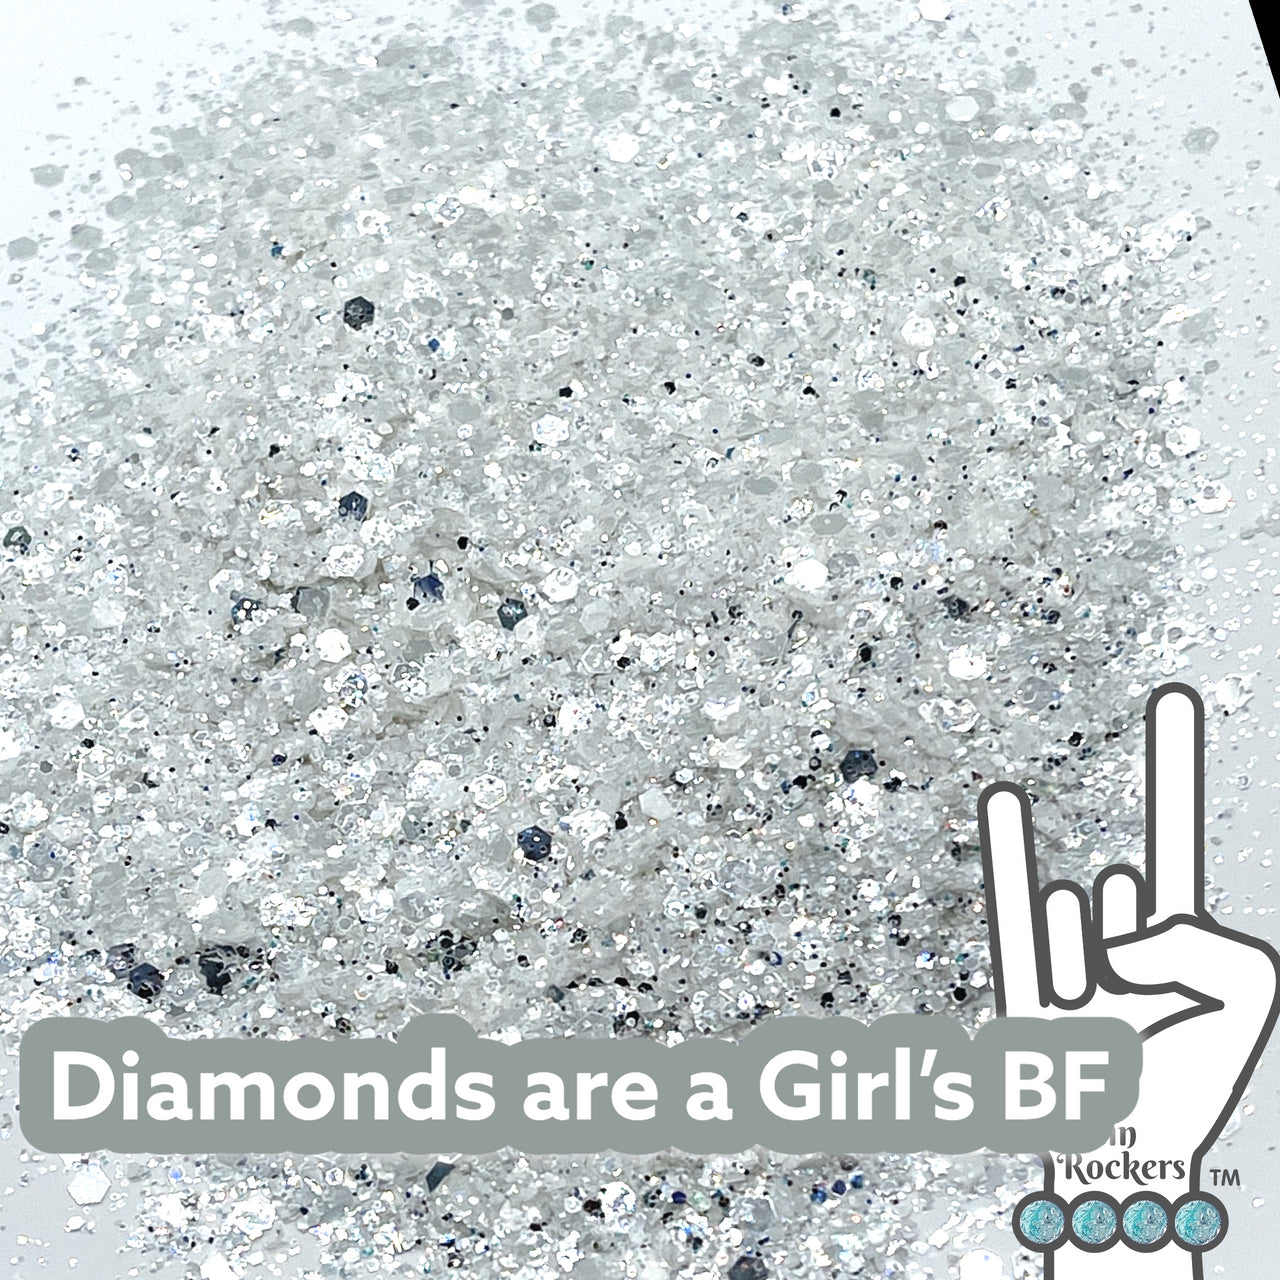 Diamonds are a Girl's BF Premium Pixie for Poxy Chunky Glitter Mix